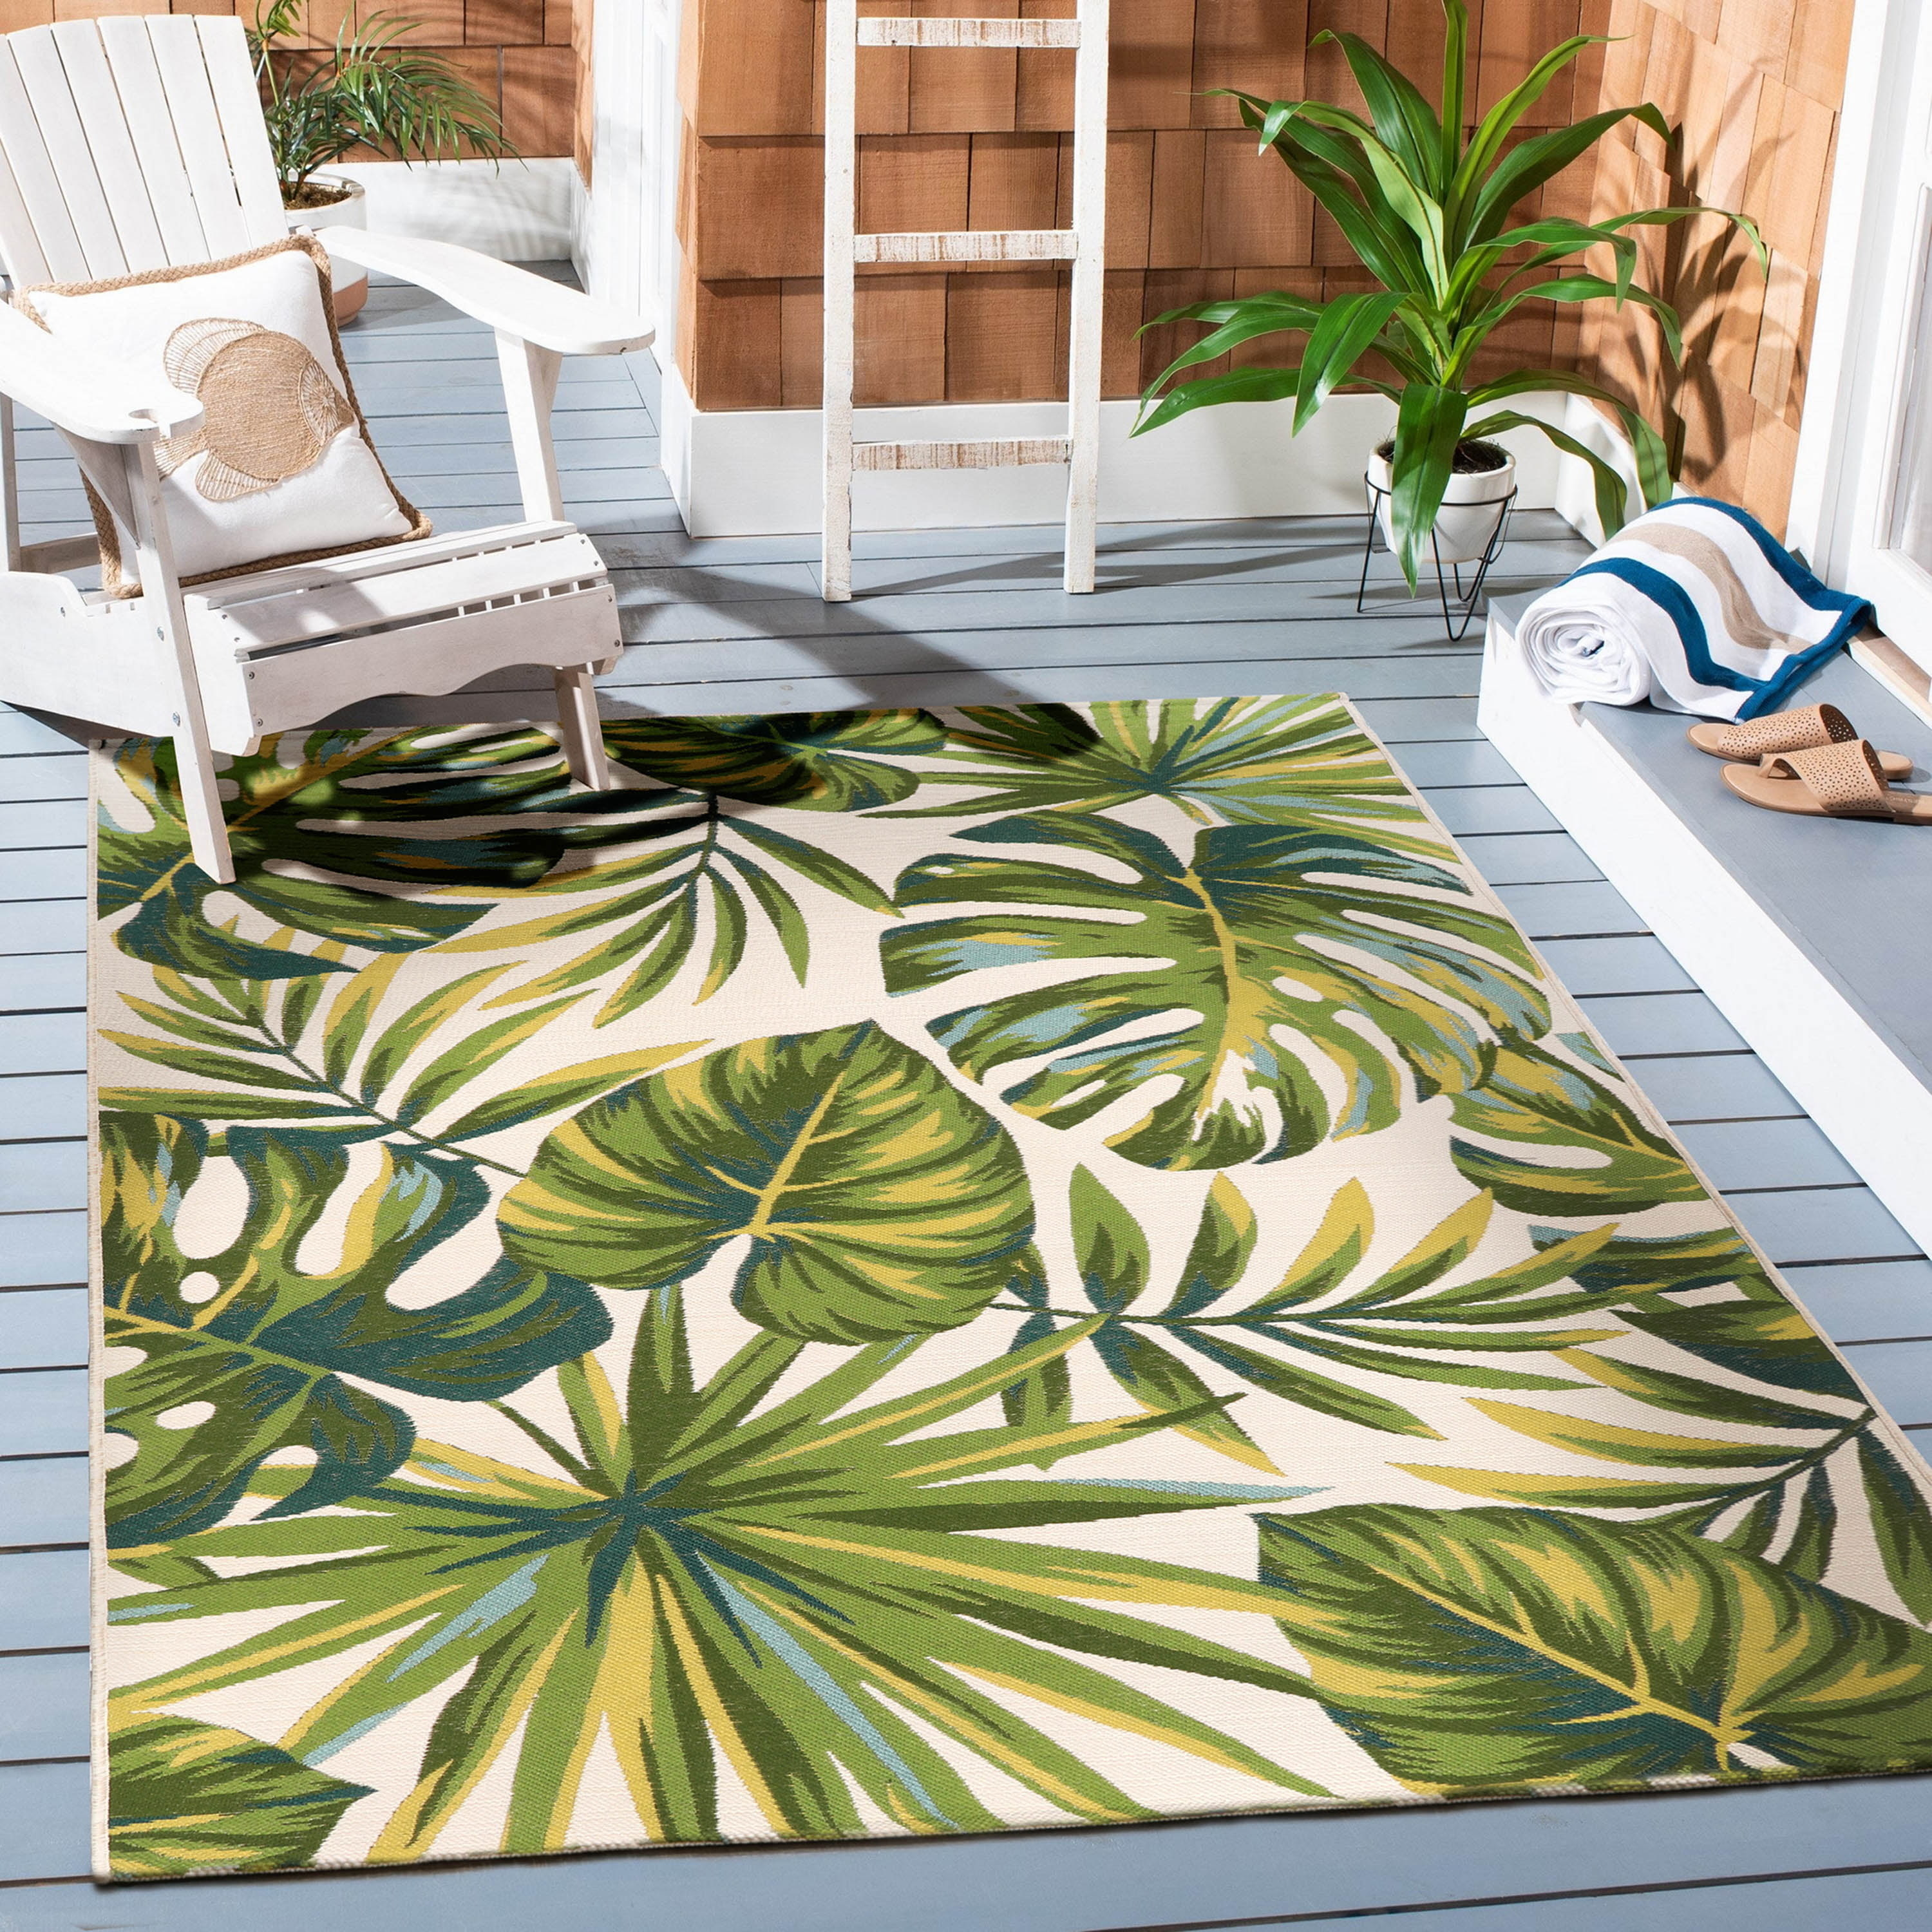 the outdoor rug featuring palm tree leaves